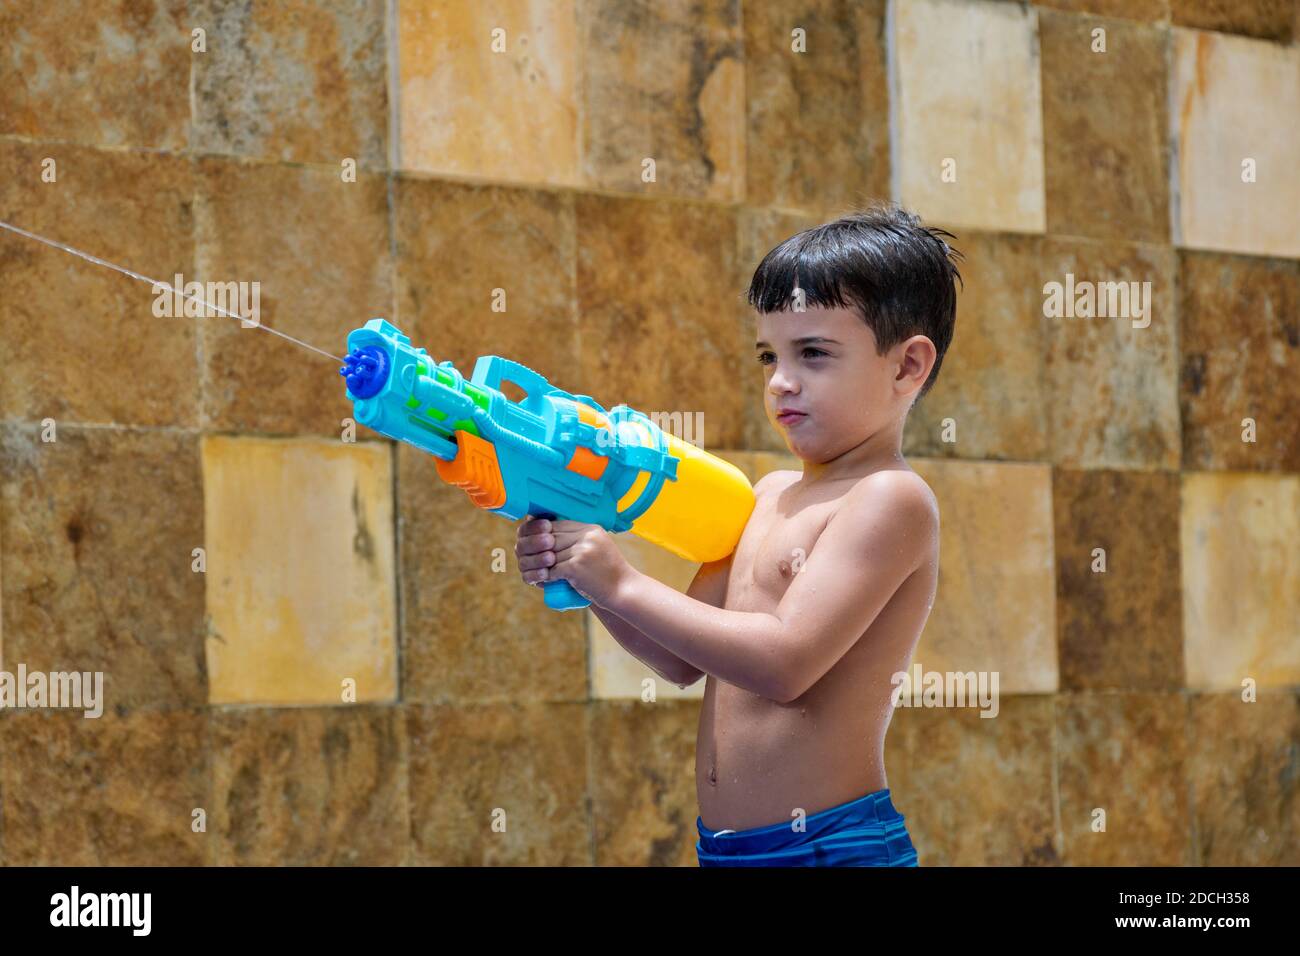 6 Year Old Child Playing With A Squirt Gun And His Dolls In The Pool